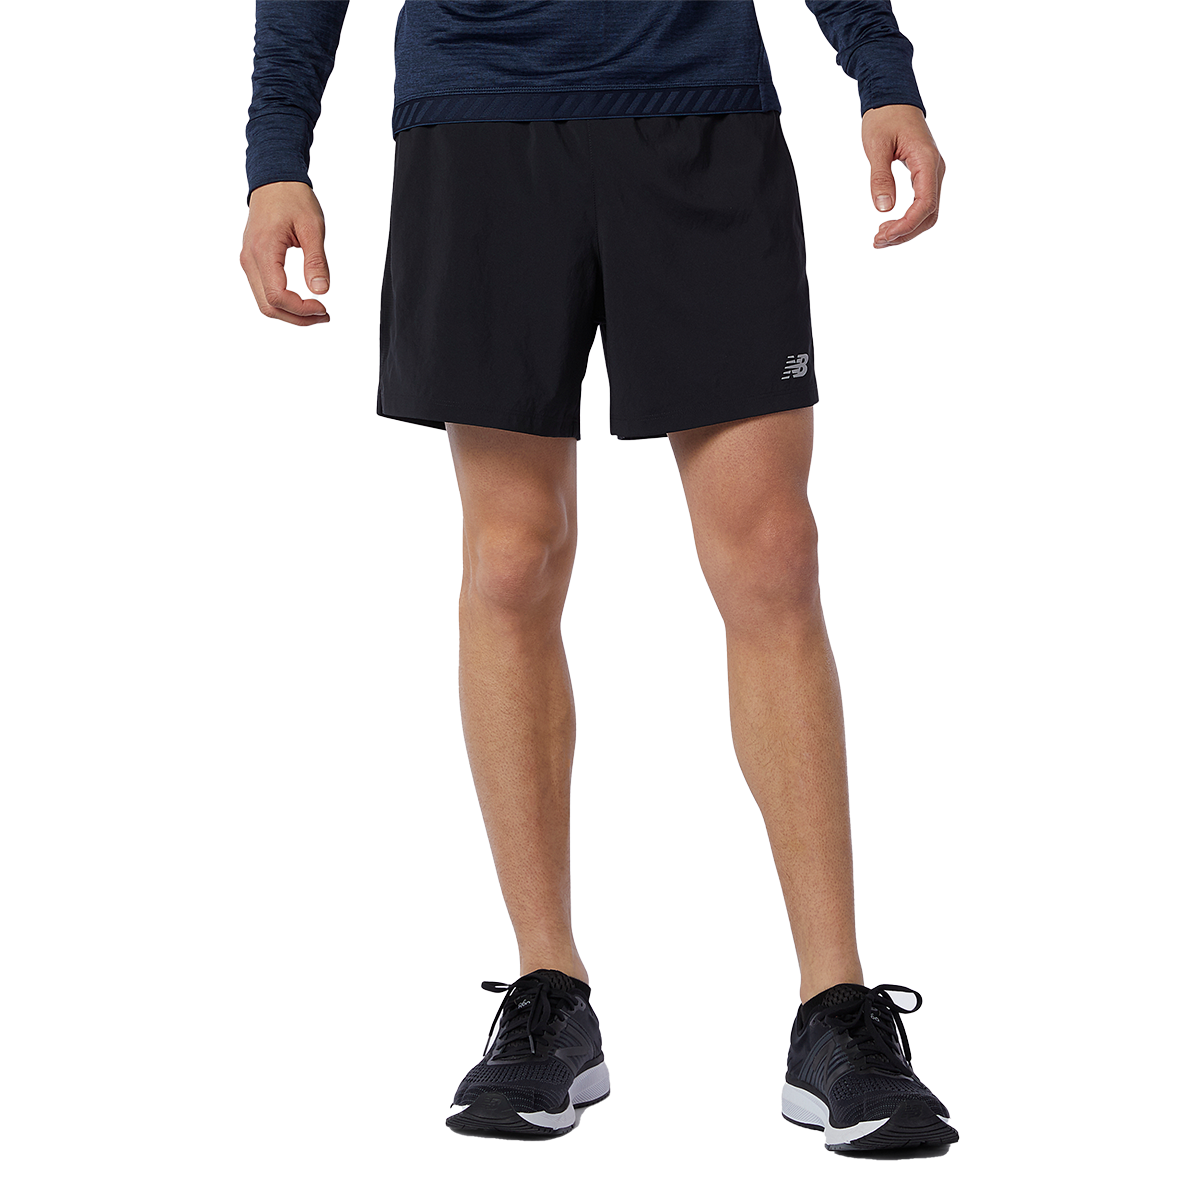 New Balance Accelerate 5" Short, , large image number null